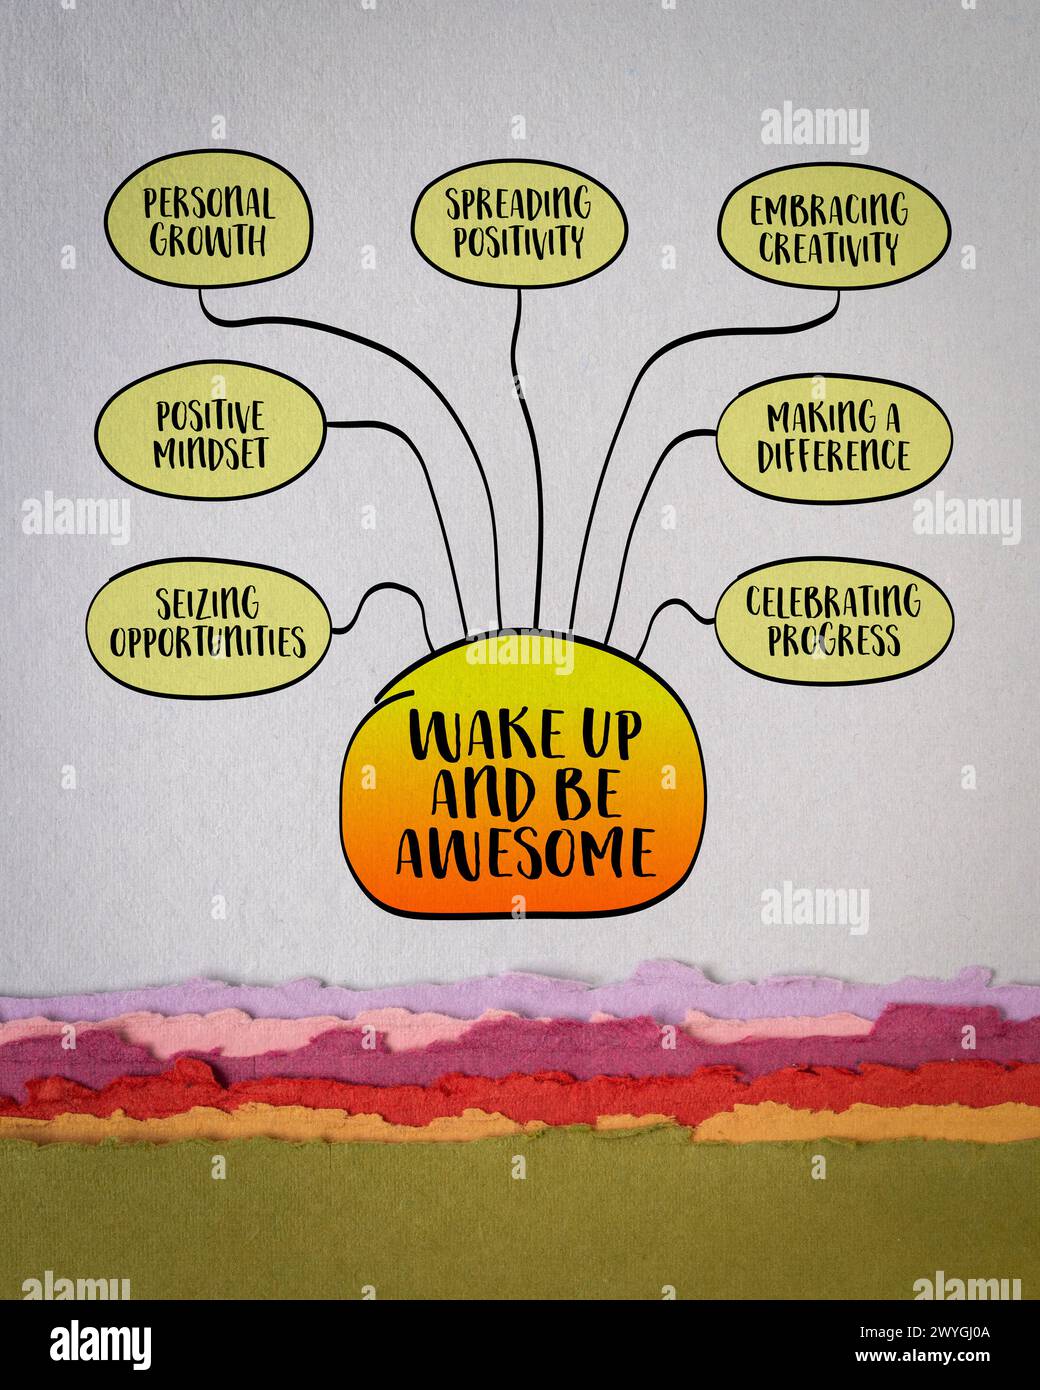 Wake up and be awesome concept encapsulates the idea of embracing each day with enthusiasm, purpose, and a positive mindset Stock Photo